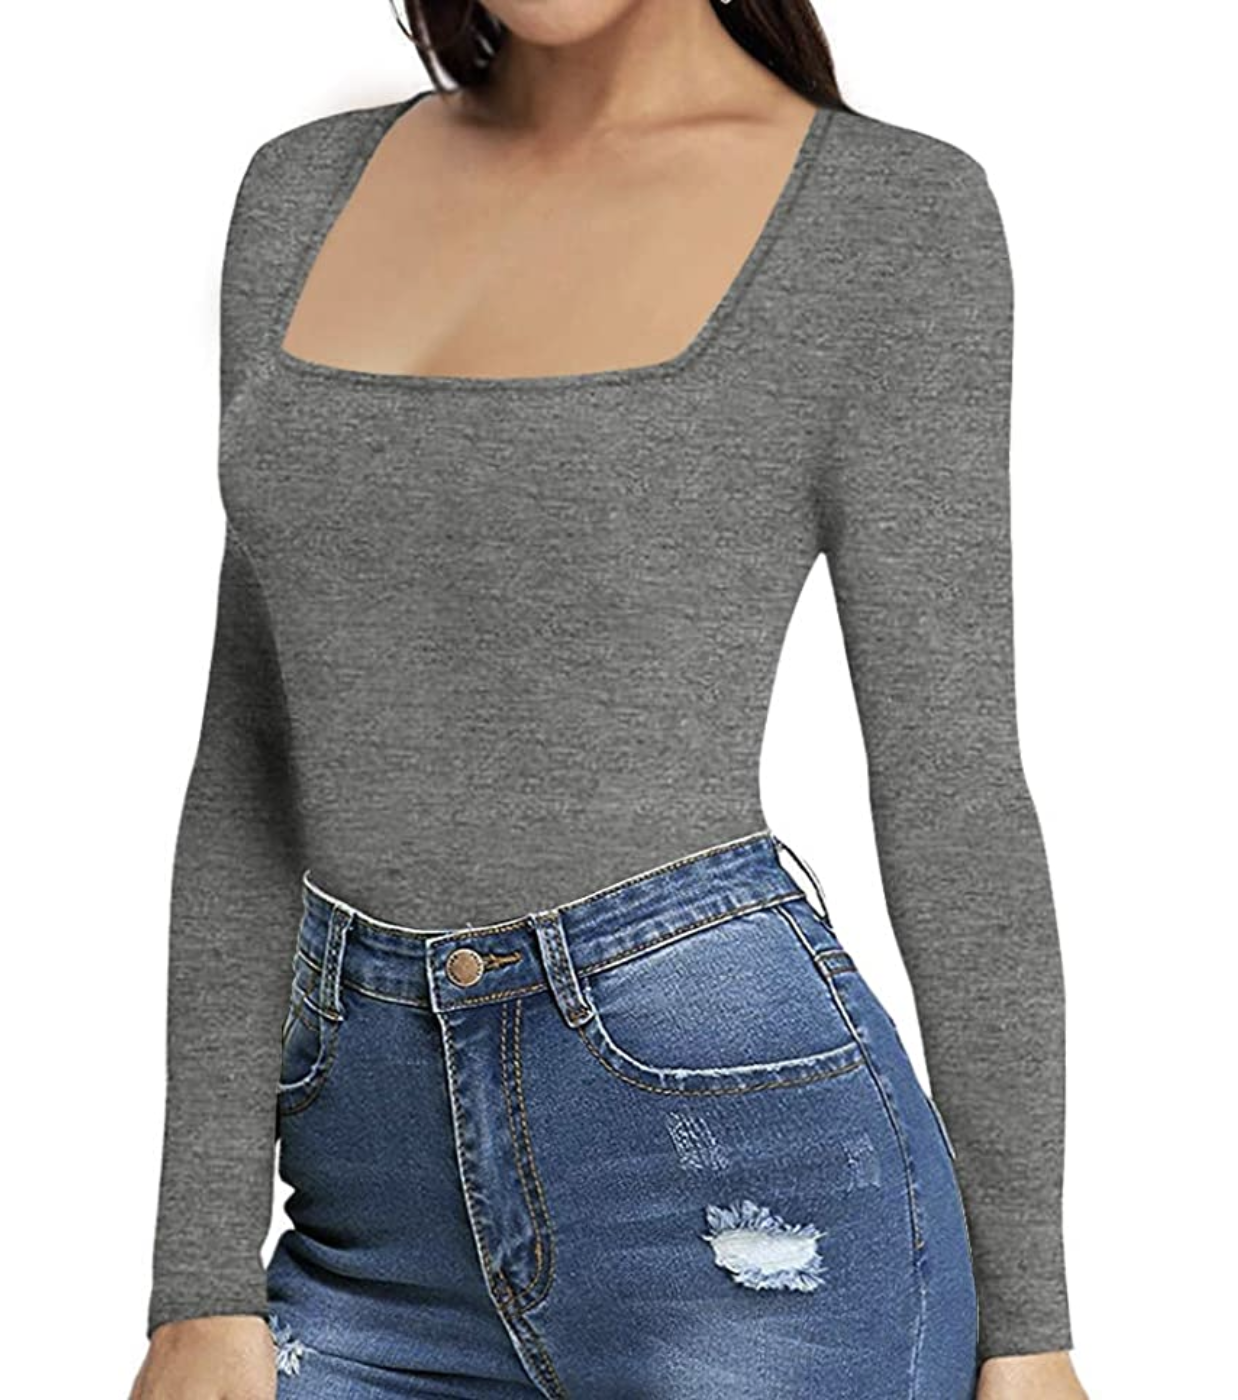 need-a-bodysuit-for-winter?-this-version-has-an-ultra-flattering-neckline